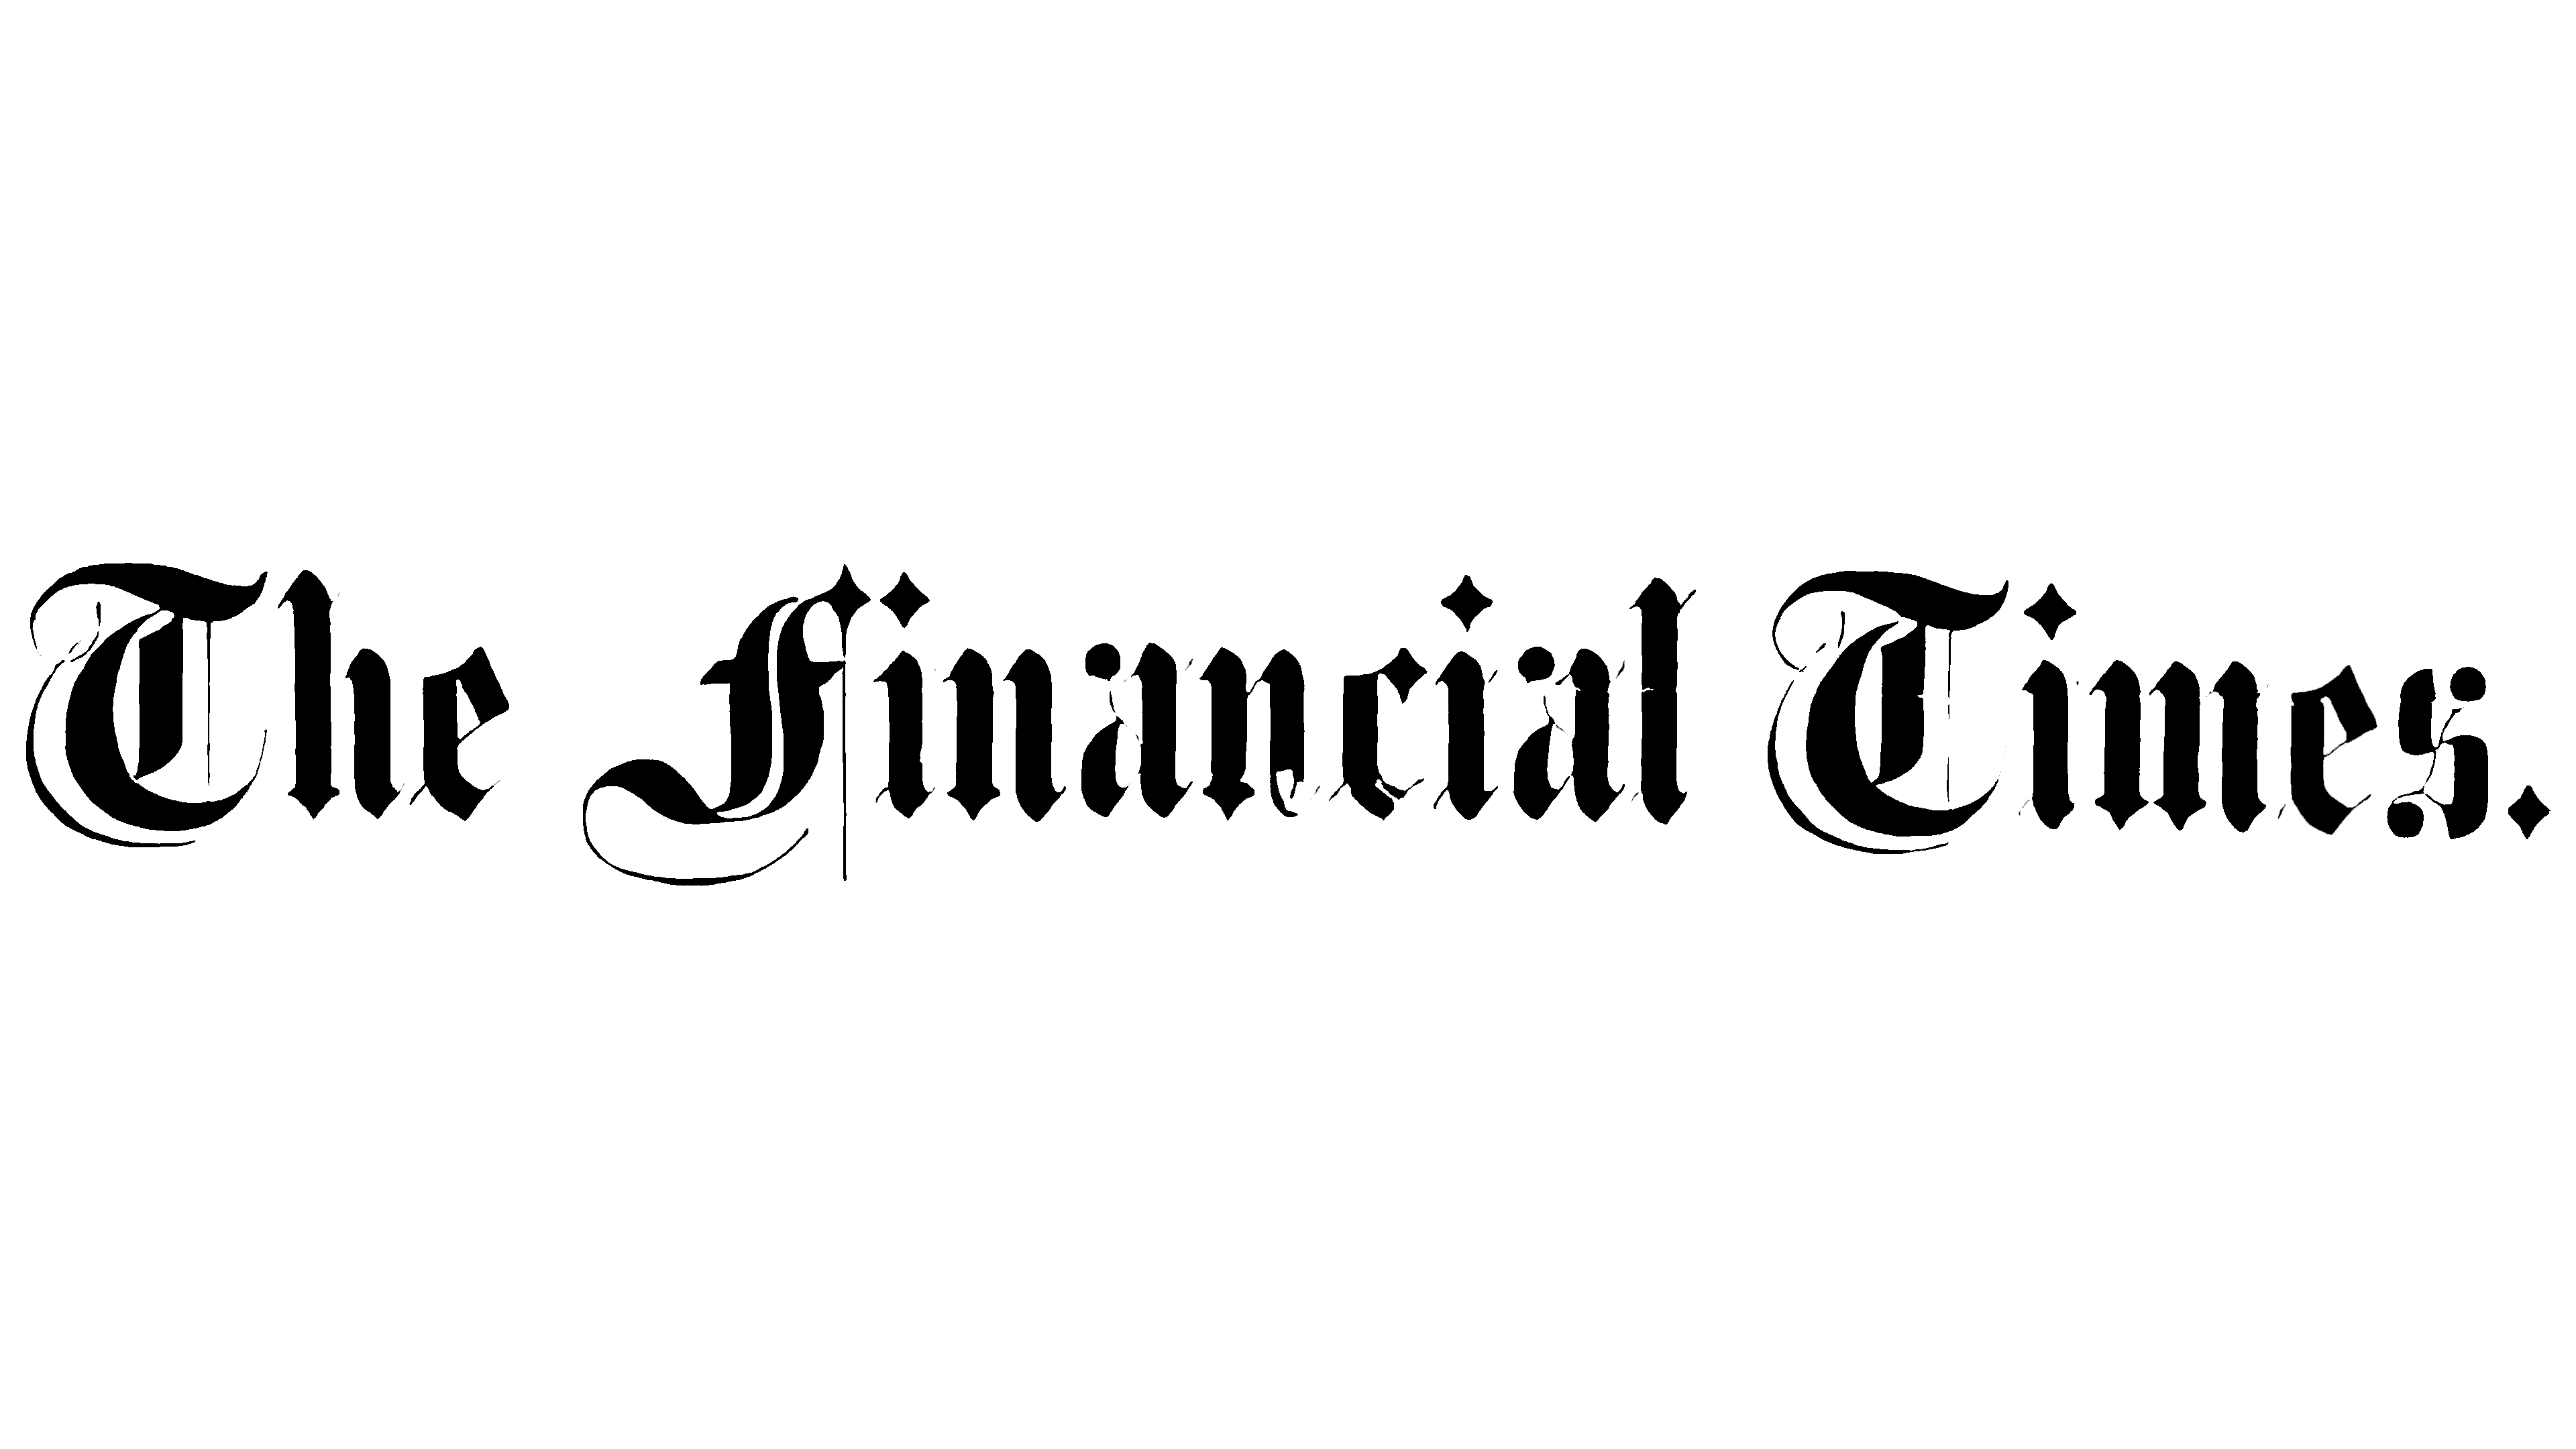 Financial Times Logo , symbol, meaning, history, PNG, brand